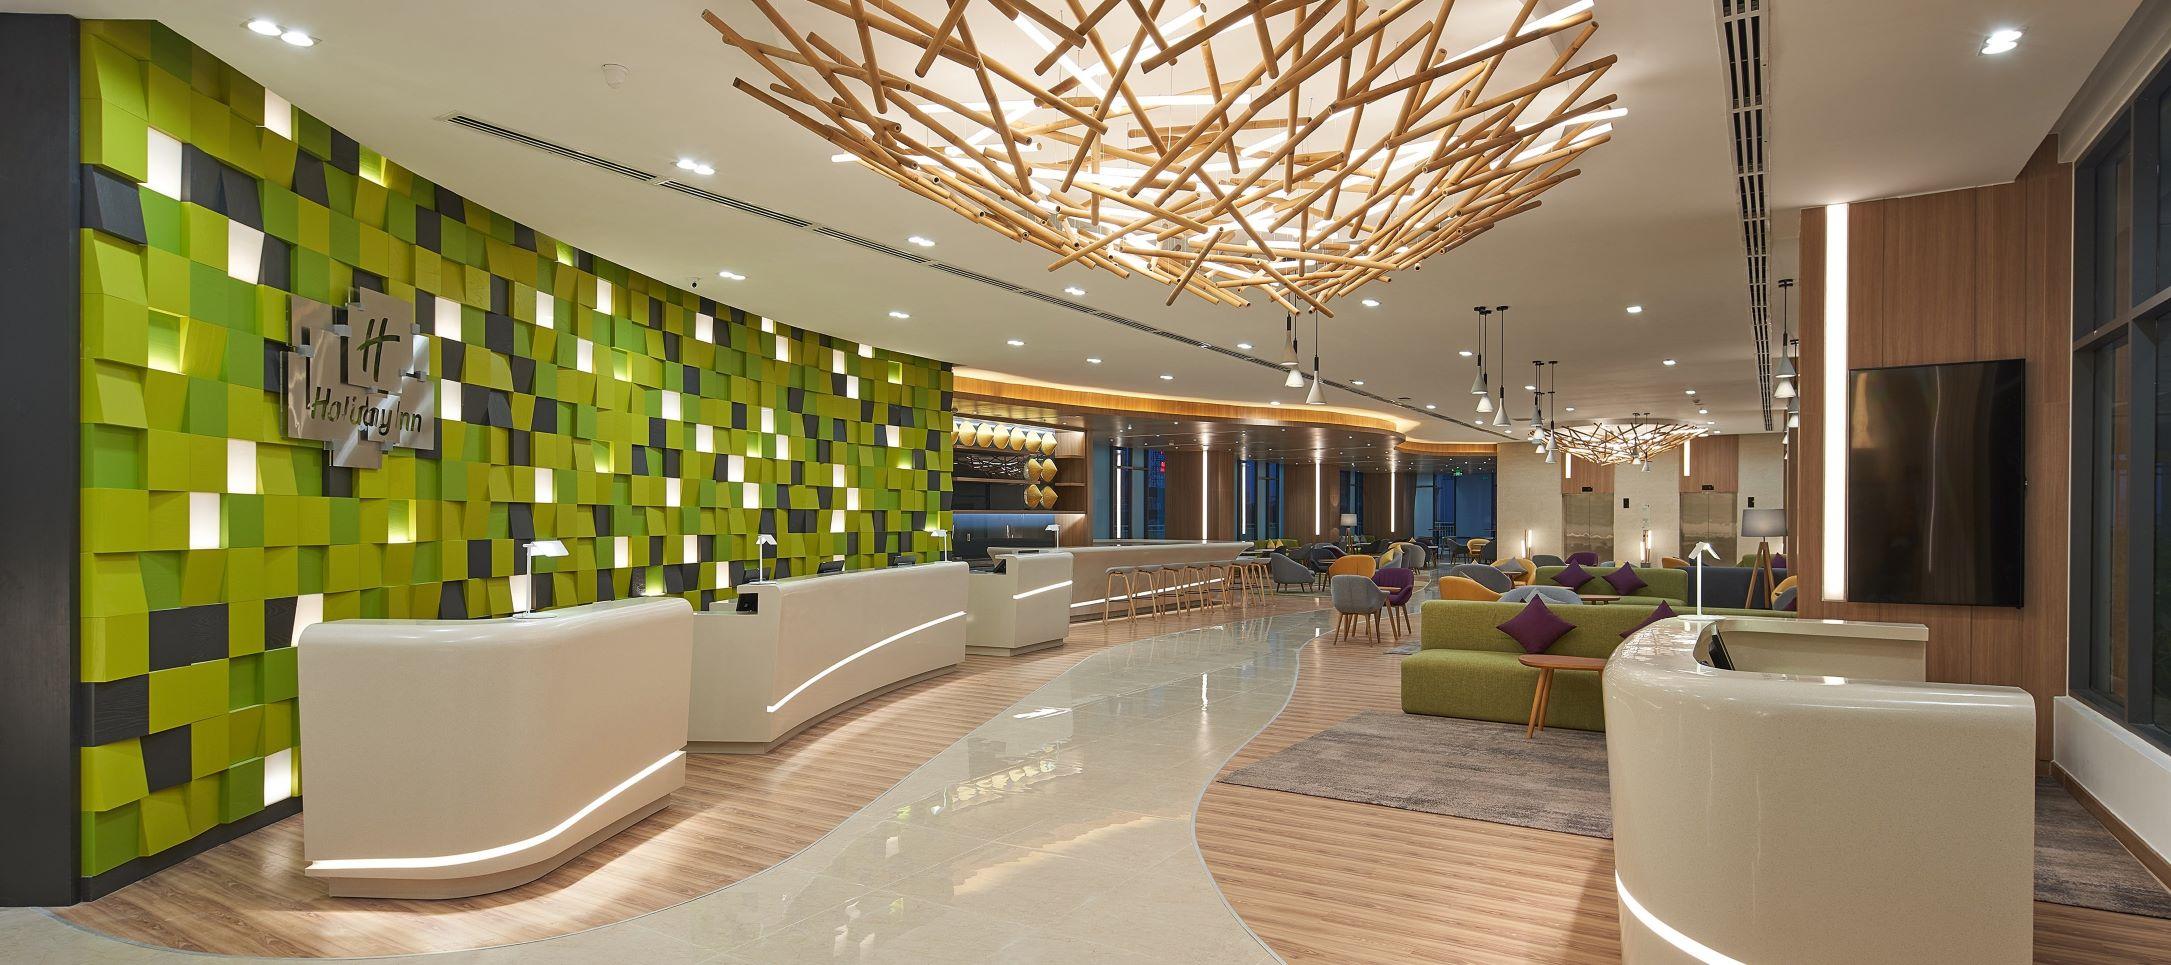 Latest Holiday Inn & Suites Saigon Airport employment/hiring with high salary & attractive benefits